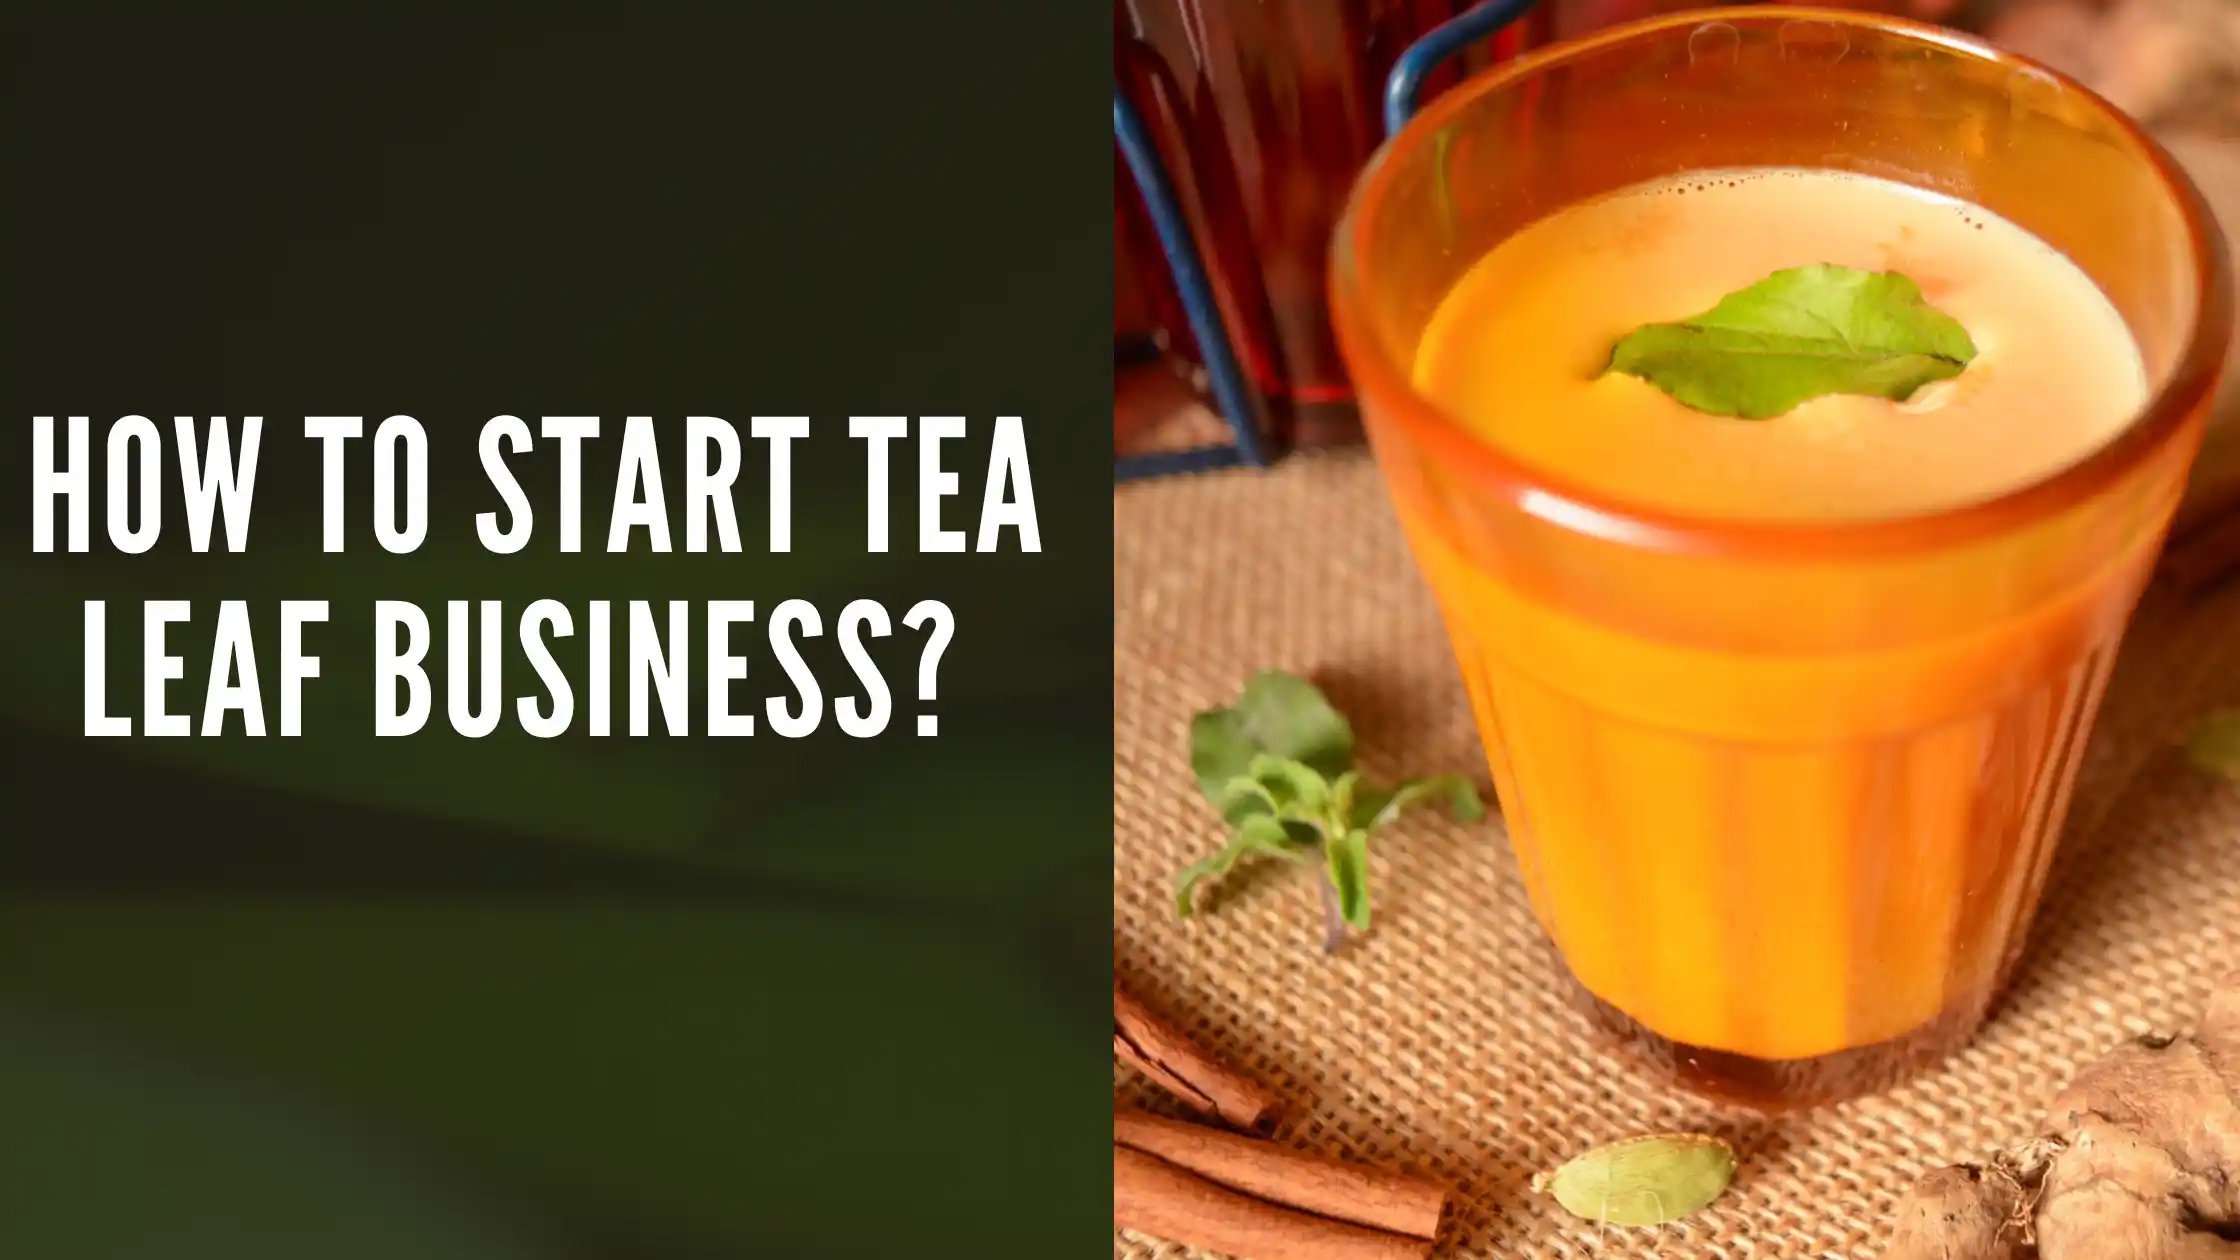 How to start tea leaf business? earn thousands of rupees every day